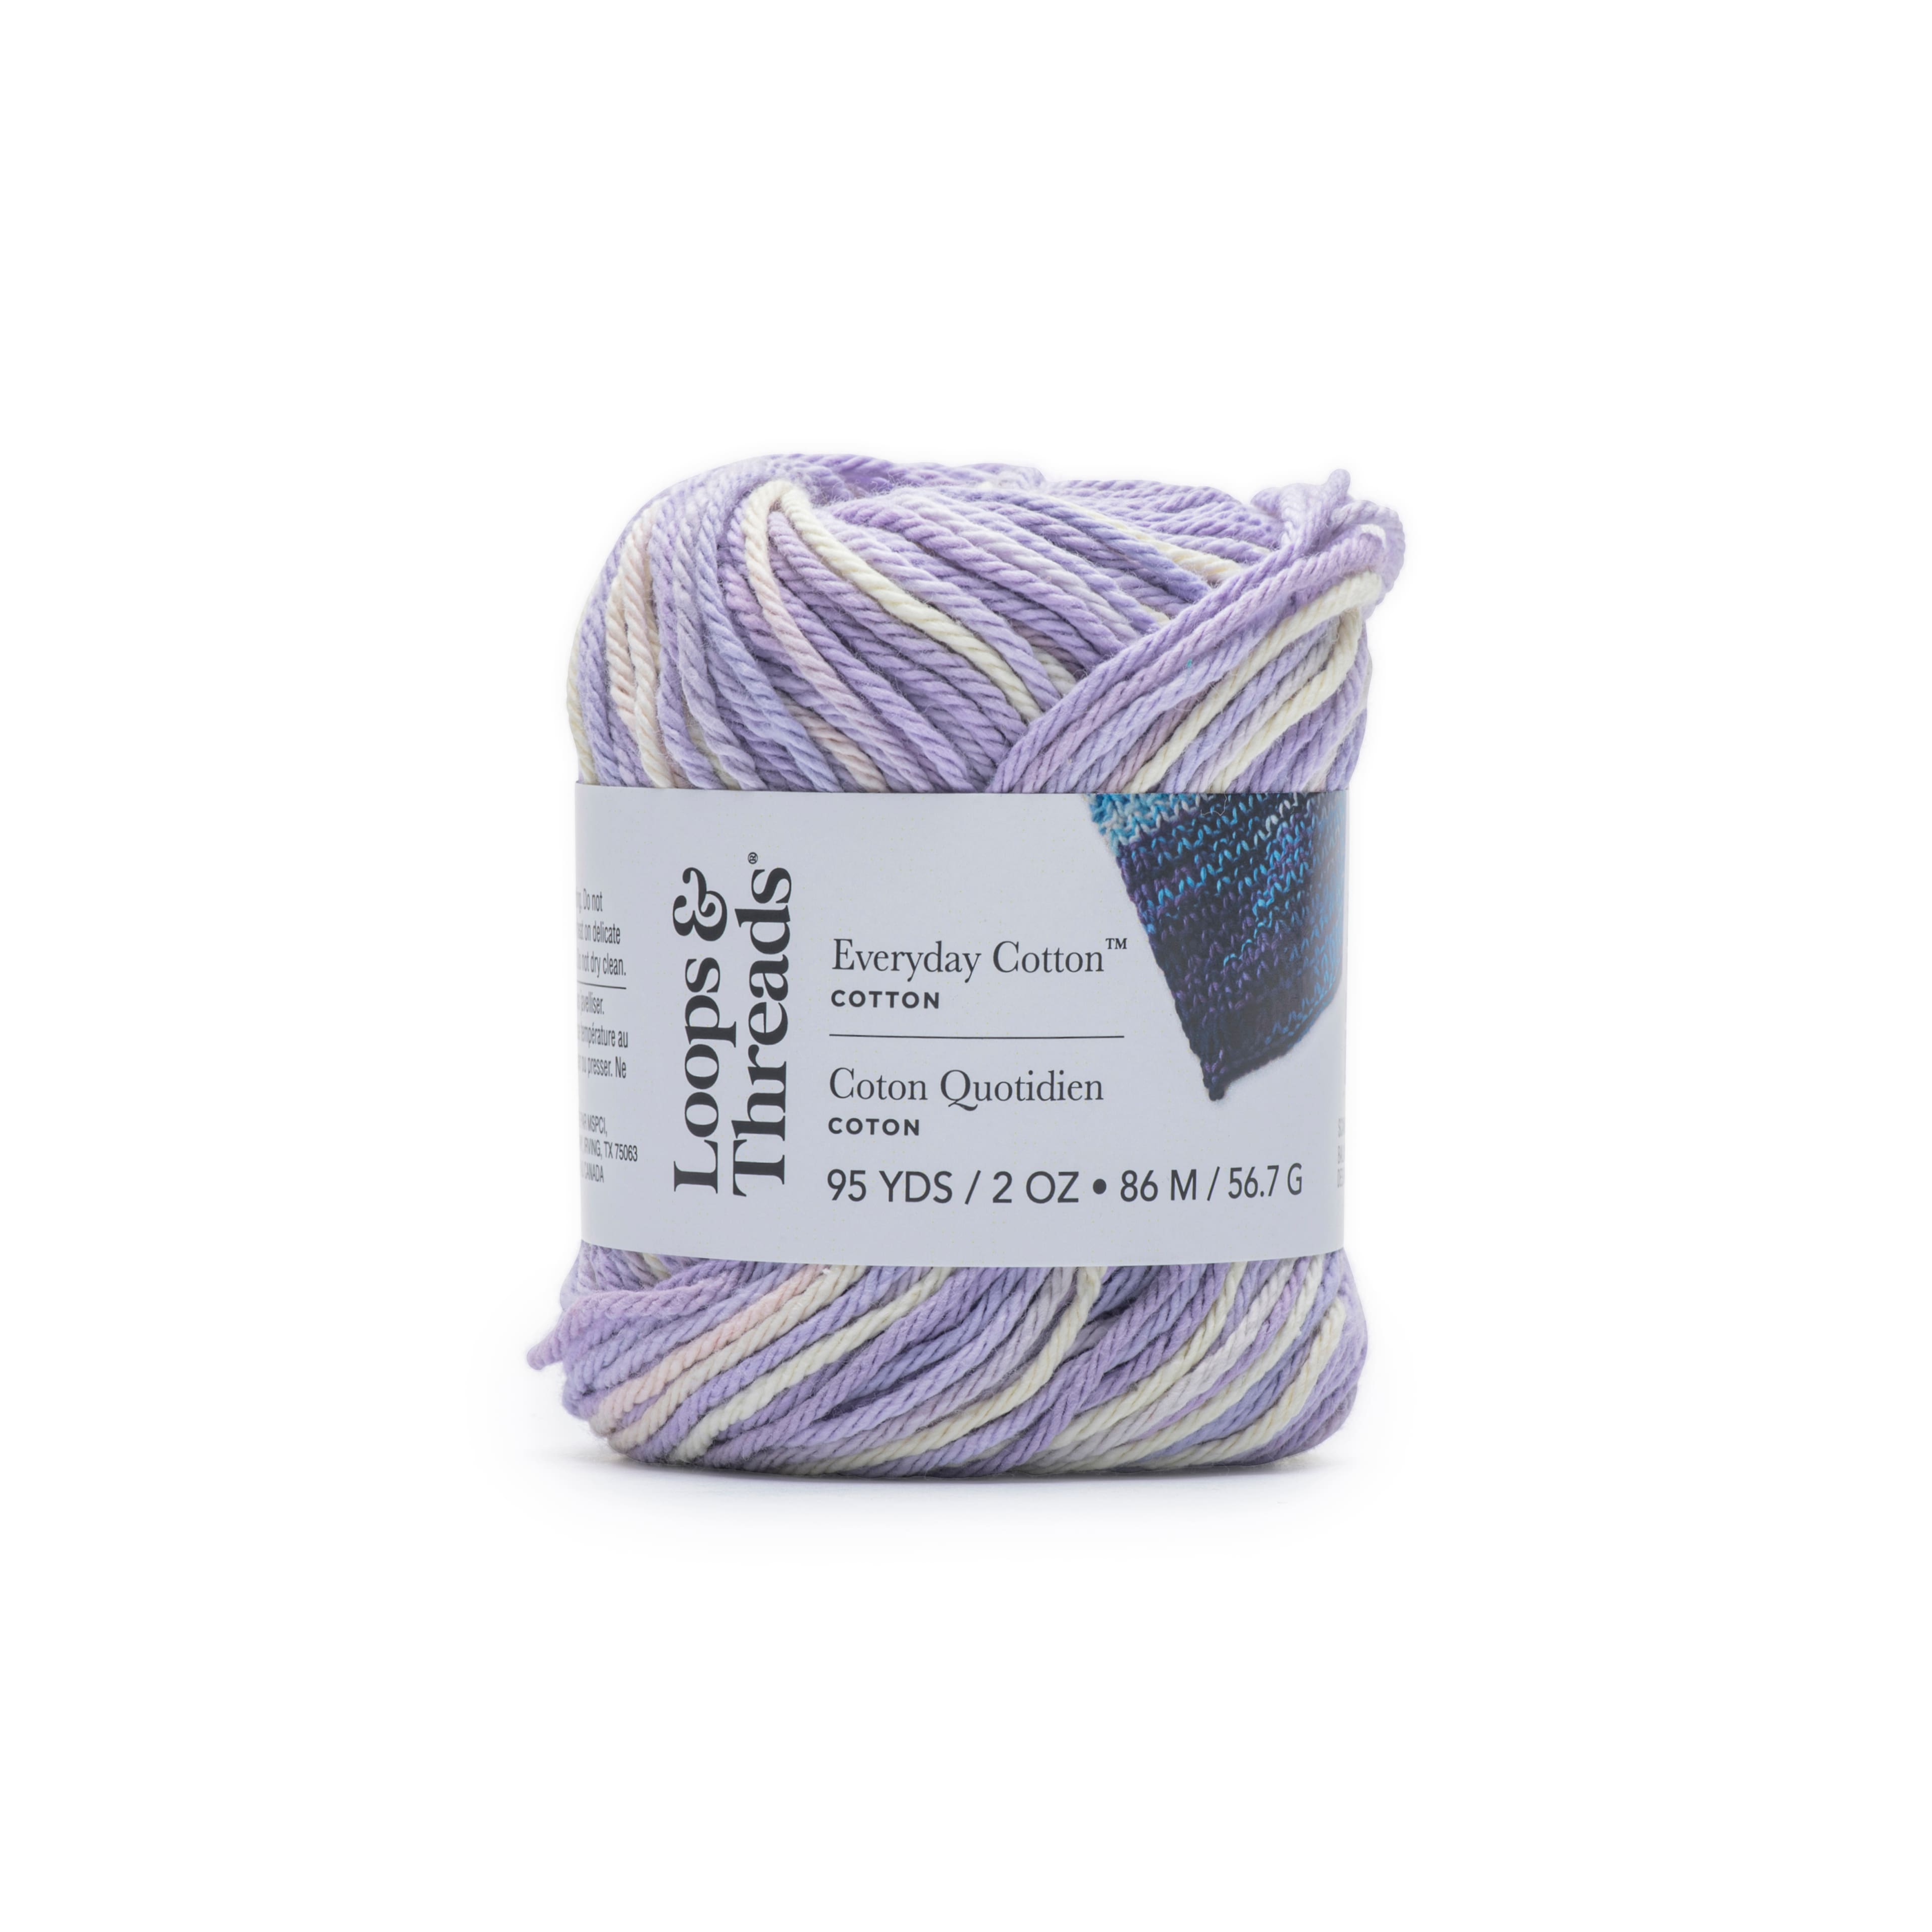 Loops & Threads Everyday Cotton Yarn - Lilac Ombre - 2 oz